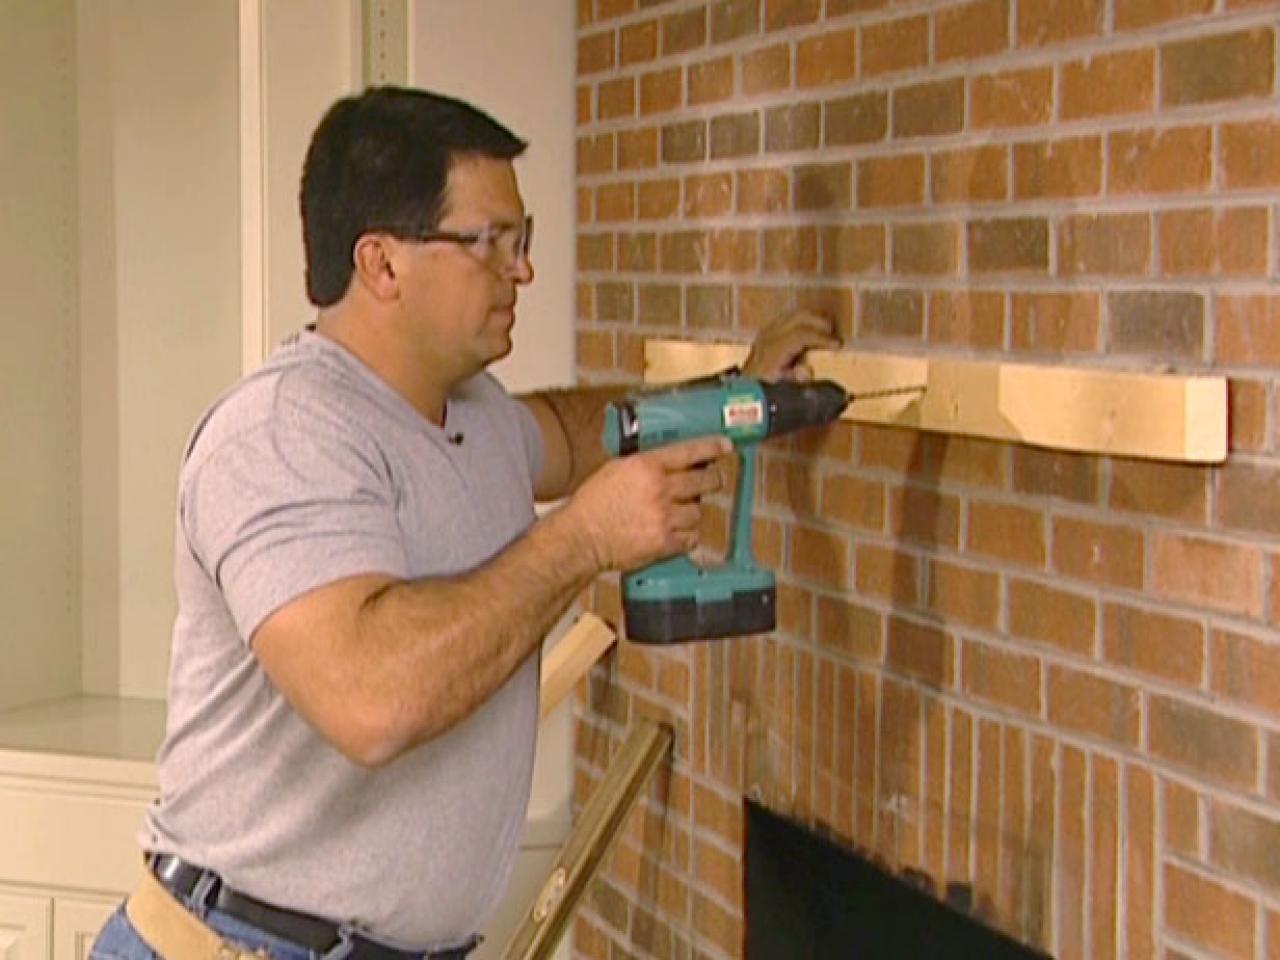 The DIYNetwork.com remodeling experts show how to create a fresh new fireplace out of standard lumber and crown molding.